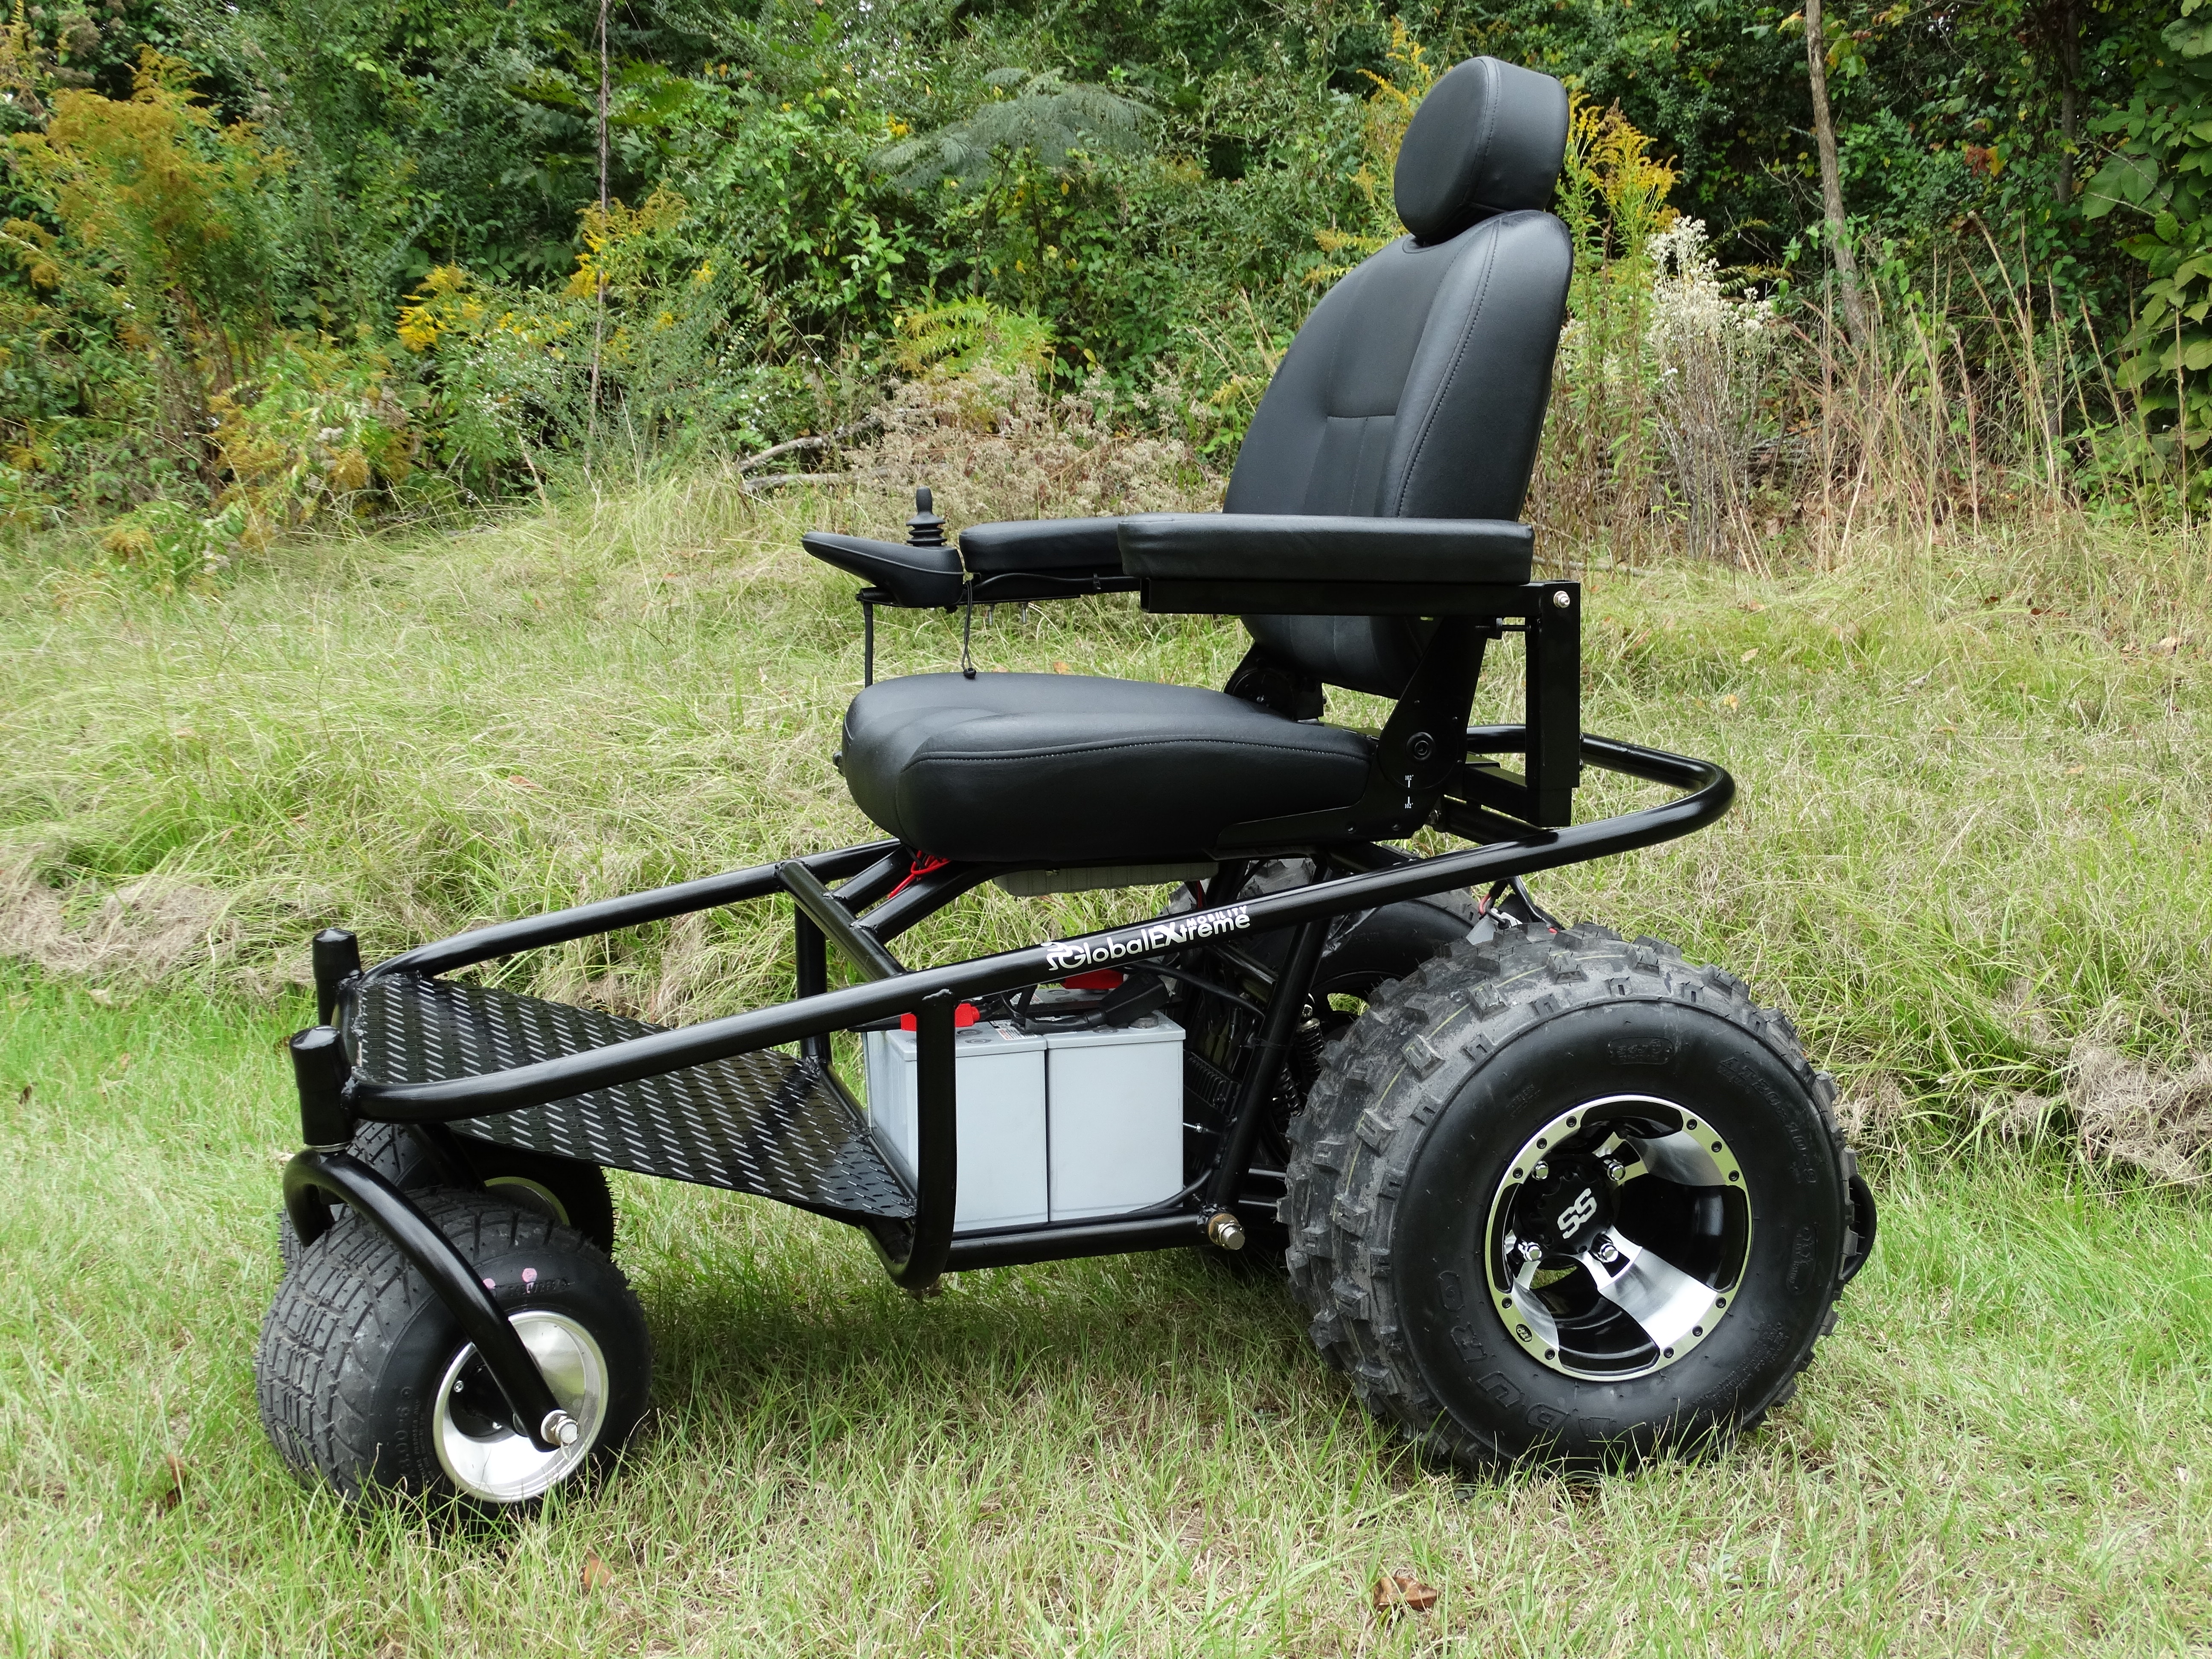 Outdoor Extreme Mobility...Powered Wheelchair...A New Definition of